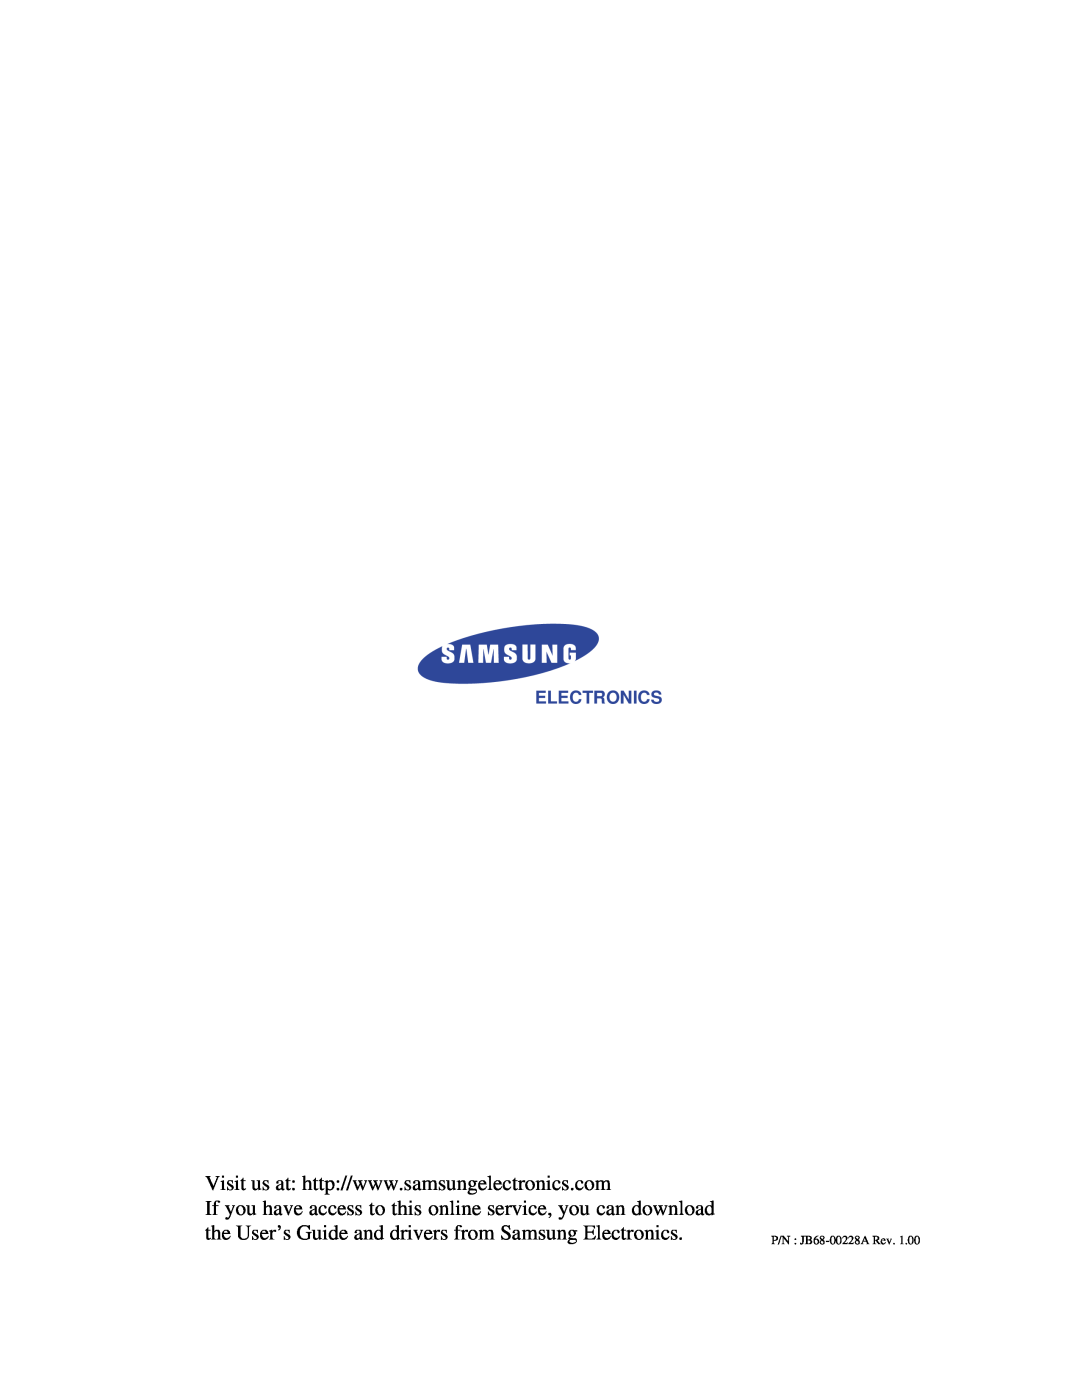 Samsung SF-3100 manual If you have access to this online service, you can download, Electronics, P/N JB68-00228A Rev 